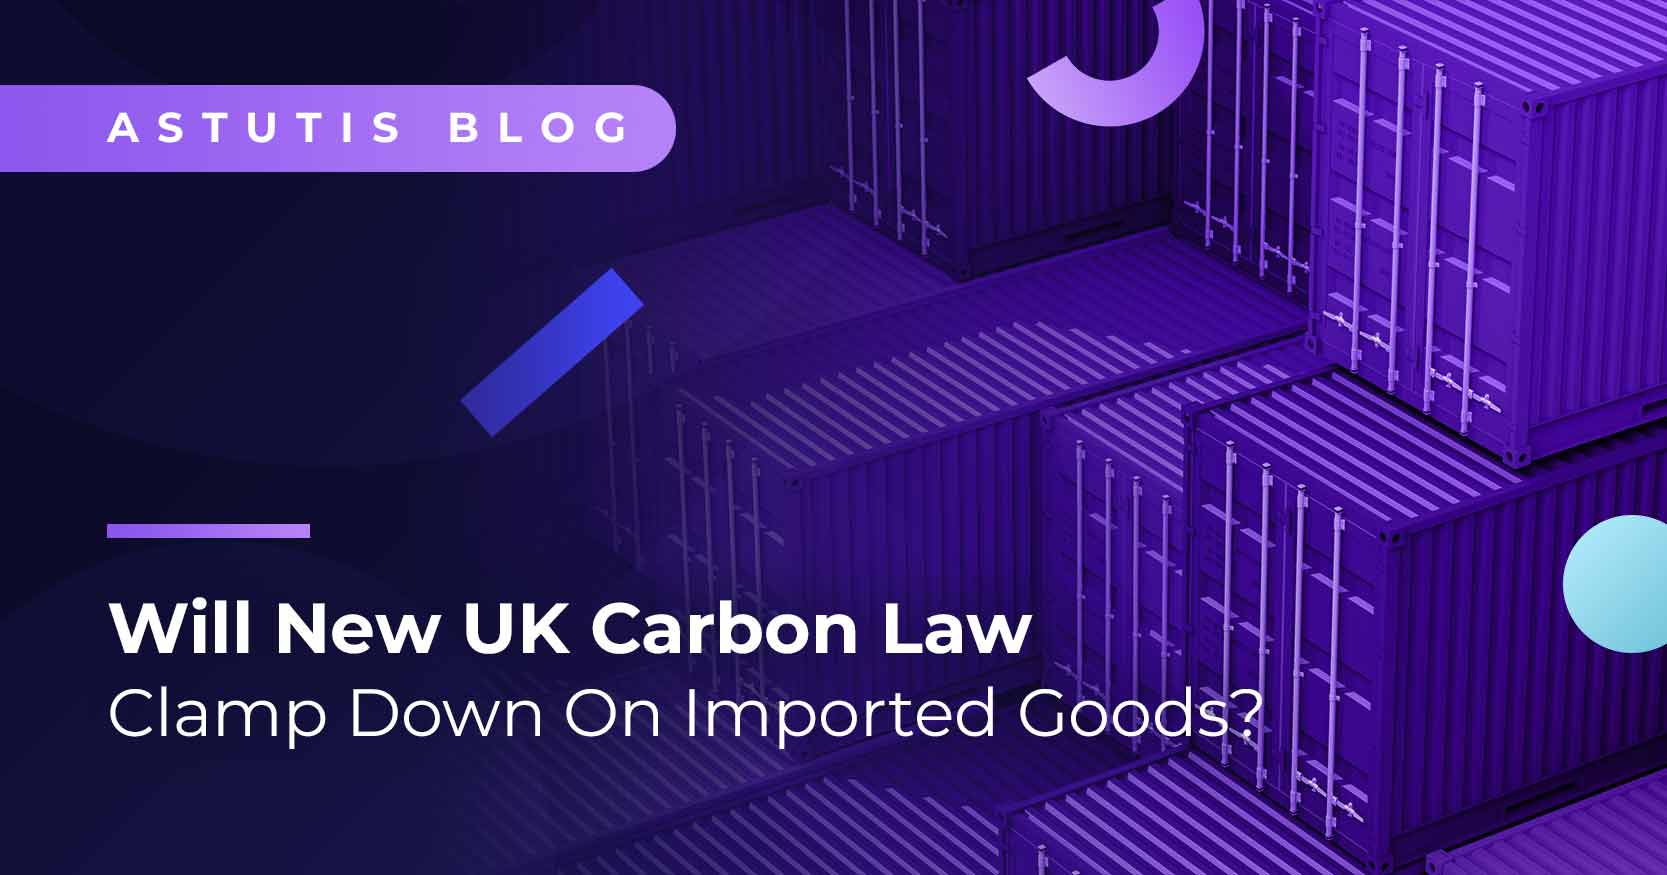 Will New UK Carbon Law Clamp Down on Imported Goods? Image